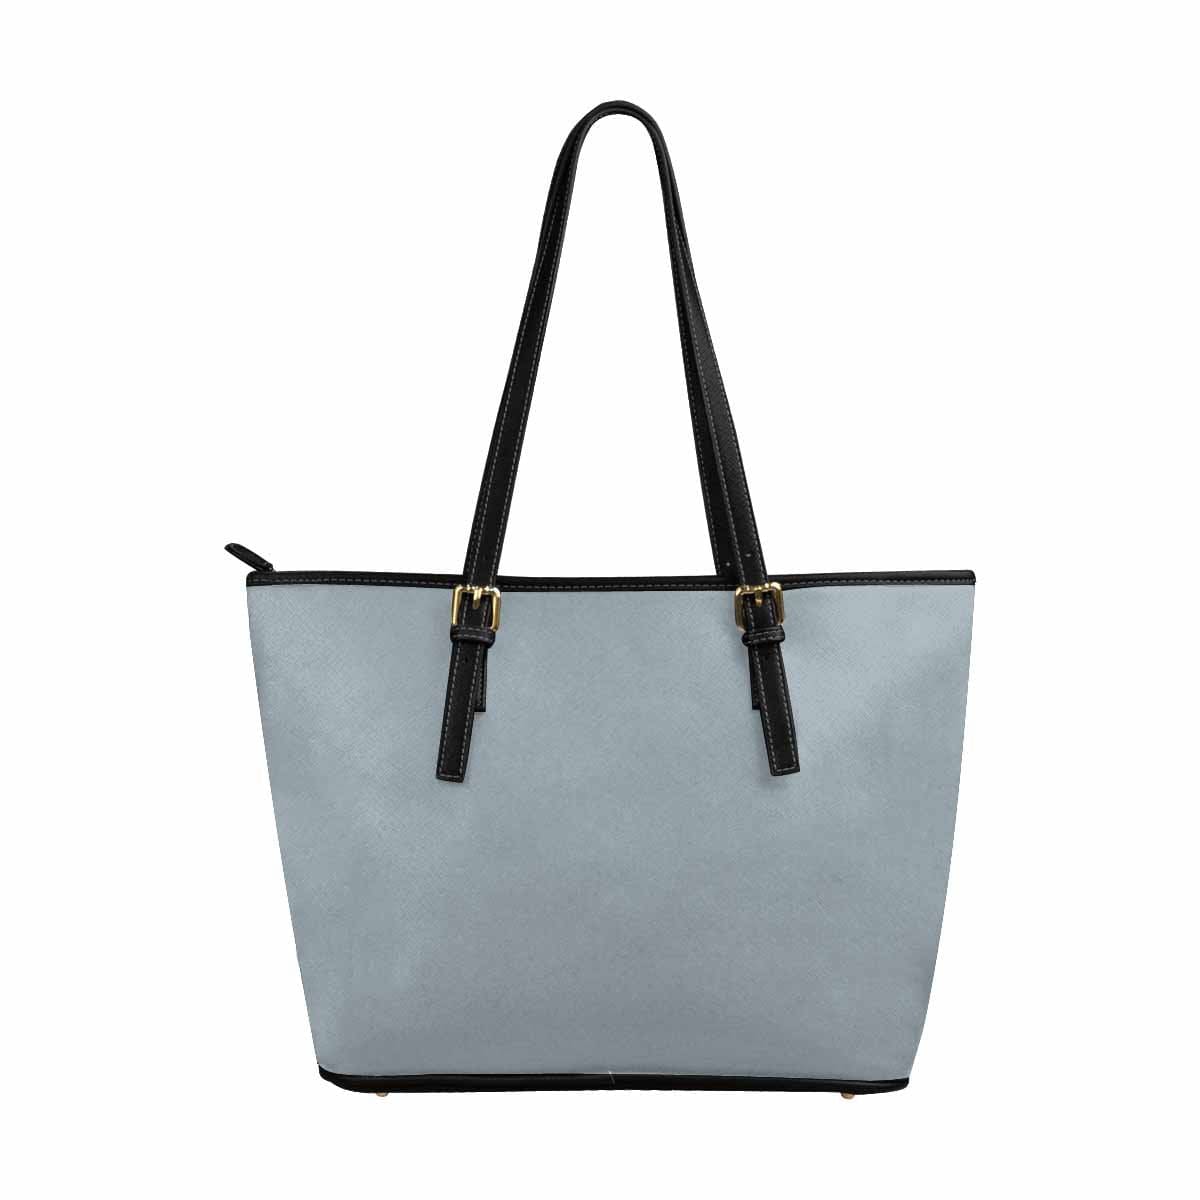 Misty Blue Gray - Large Leather Tote Bag with Zipper